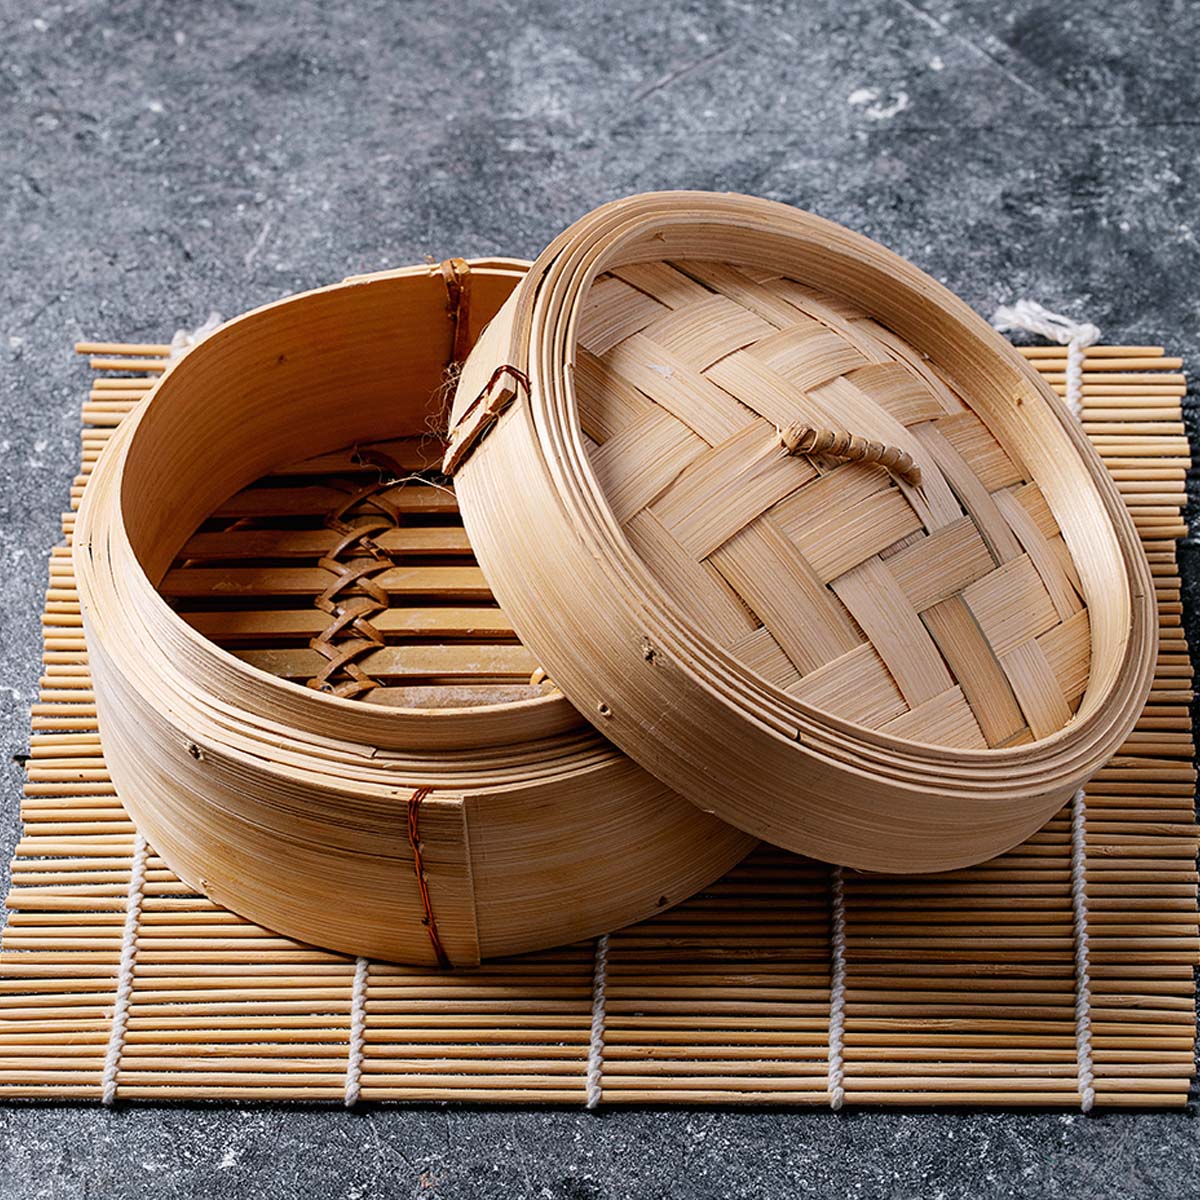 How to clean a bamboo steamer. Know more about cooking with a bamboo steamer and how to maintain it in tip-top condition, please read on.